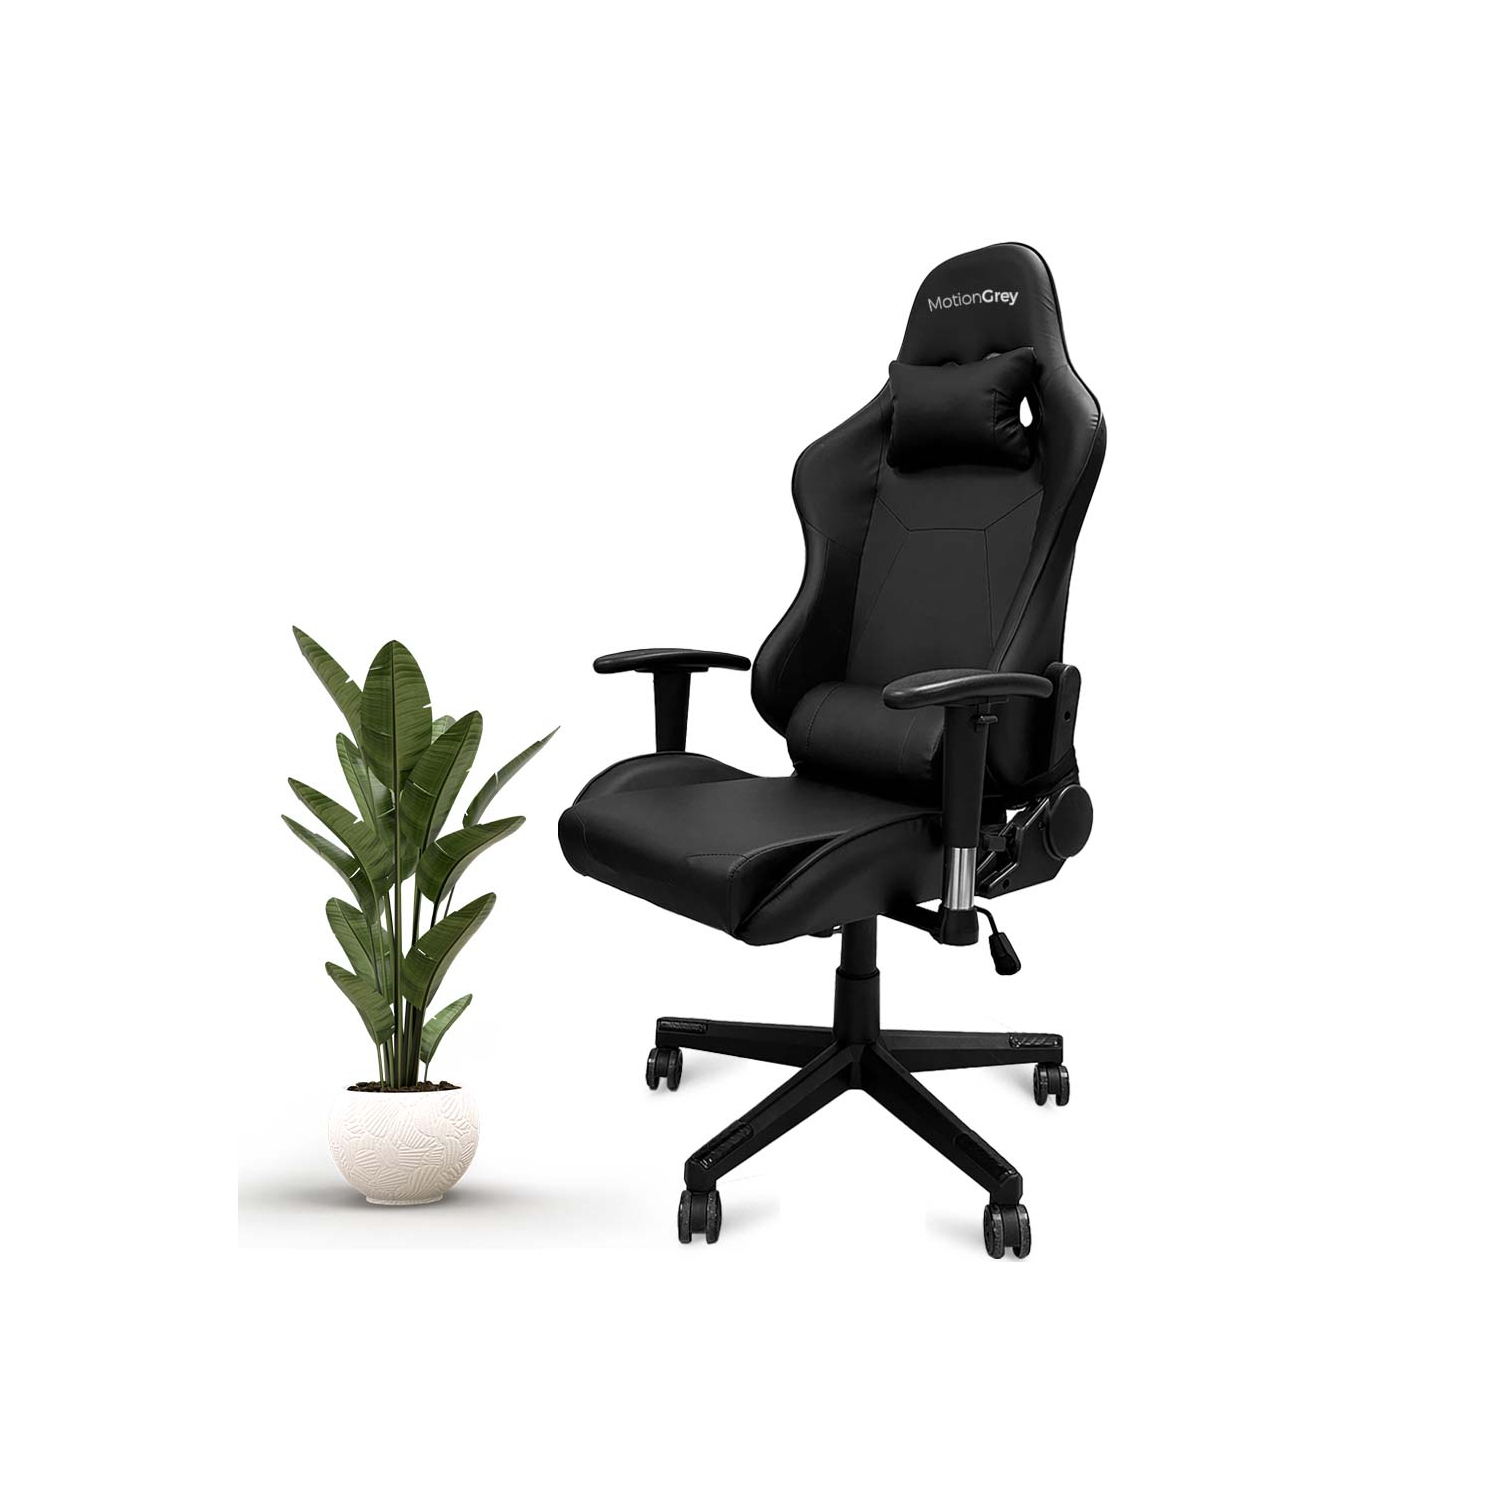 MotionGrey Enforcer - Office Gaming Chair, Ergonomic, High Back, PU Leather, with Height Adjustment, Headrest & Lumbar Cushions - Black - Only at BestBuy